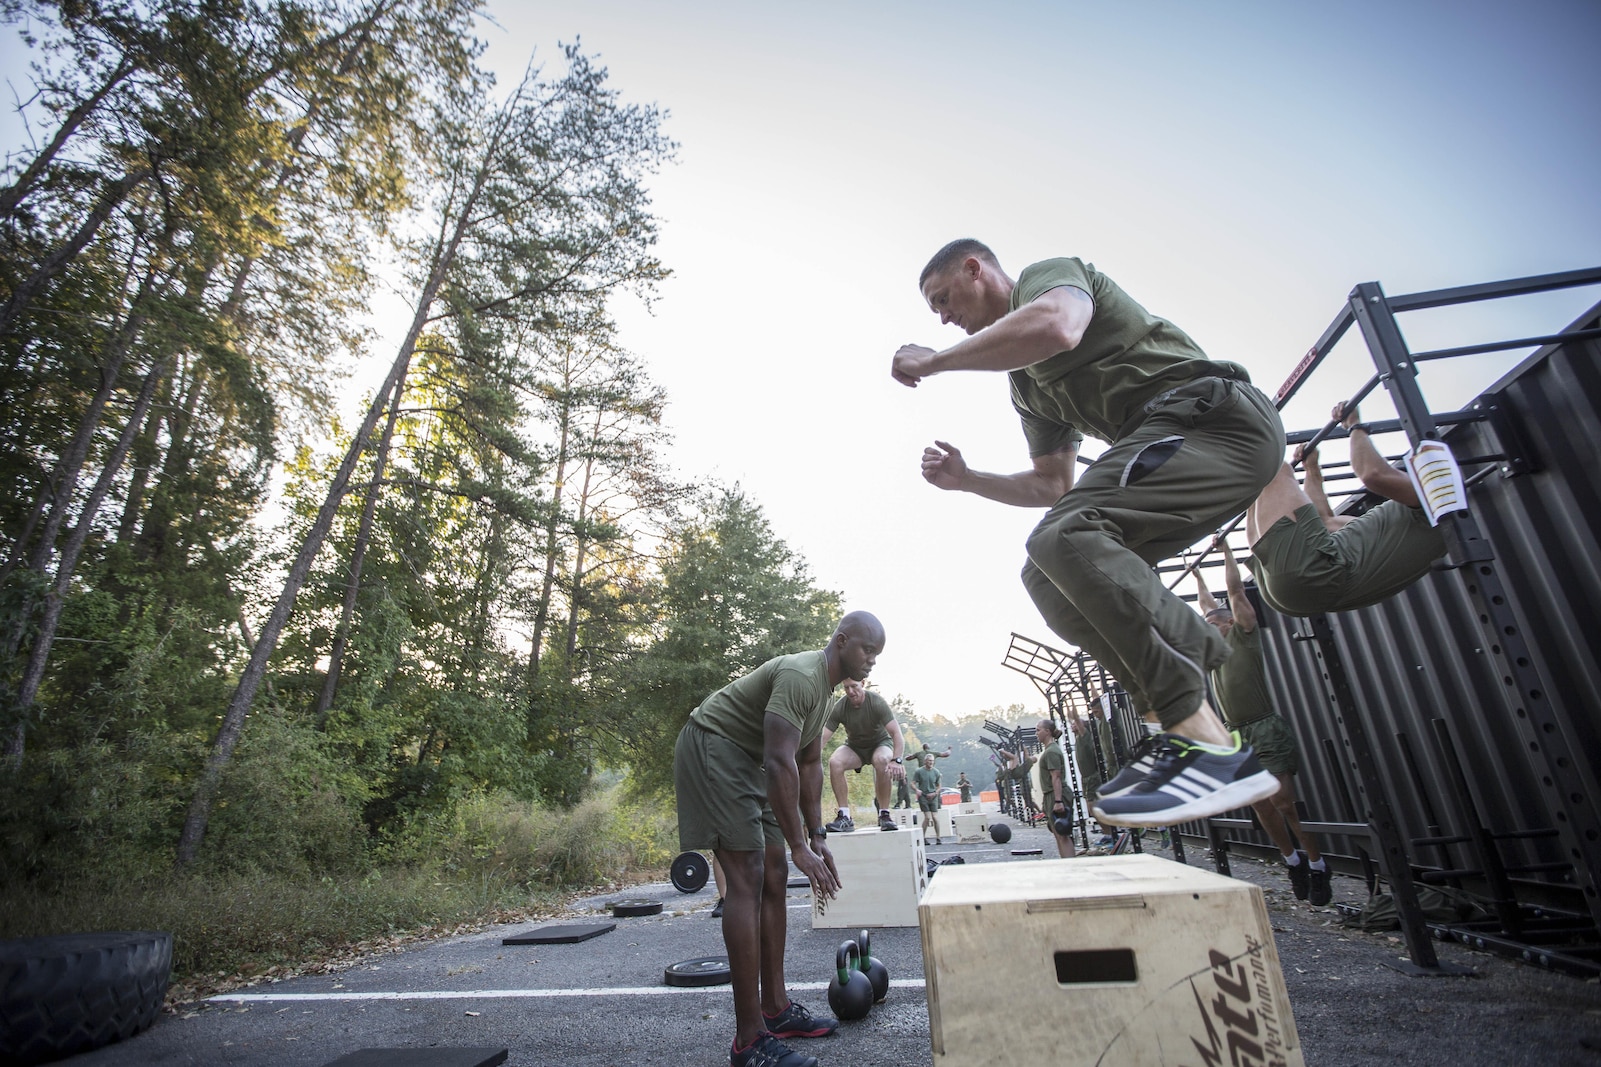 U.S. Marines attend the first Force Fitness Instructor Course aboard Marine Corps Base Quantico, VA., Oct. 17, 2016. The course is designed to produce Fitness Instructors to return to the fleet and maintain health and wellness while improving human performance. (U.S. Marine Corps photo by Sgt. Melissa Marnell)